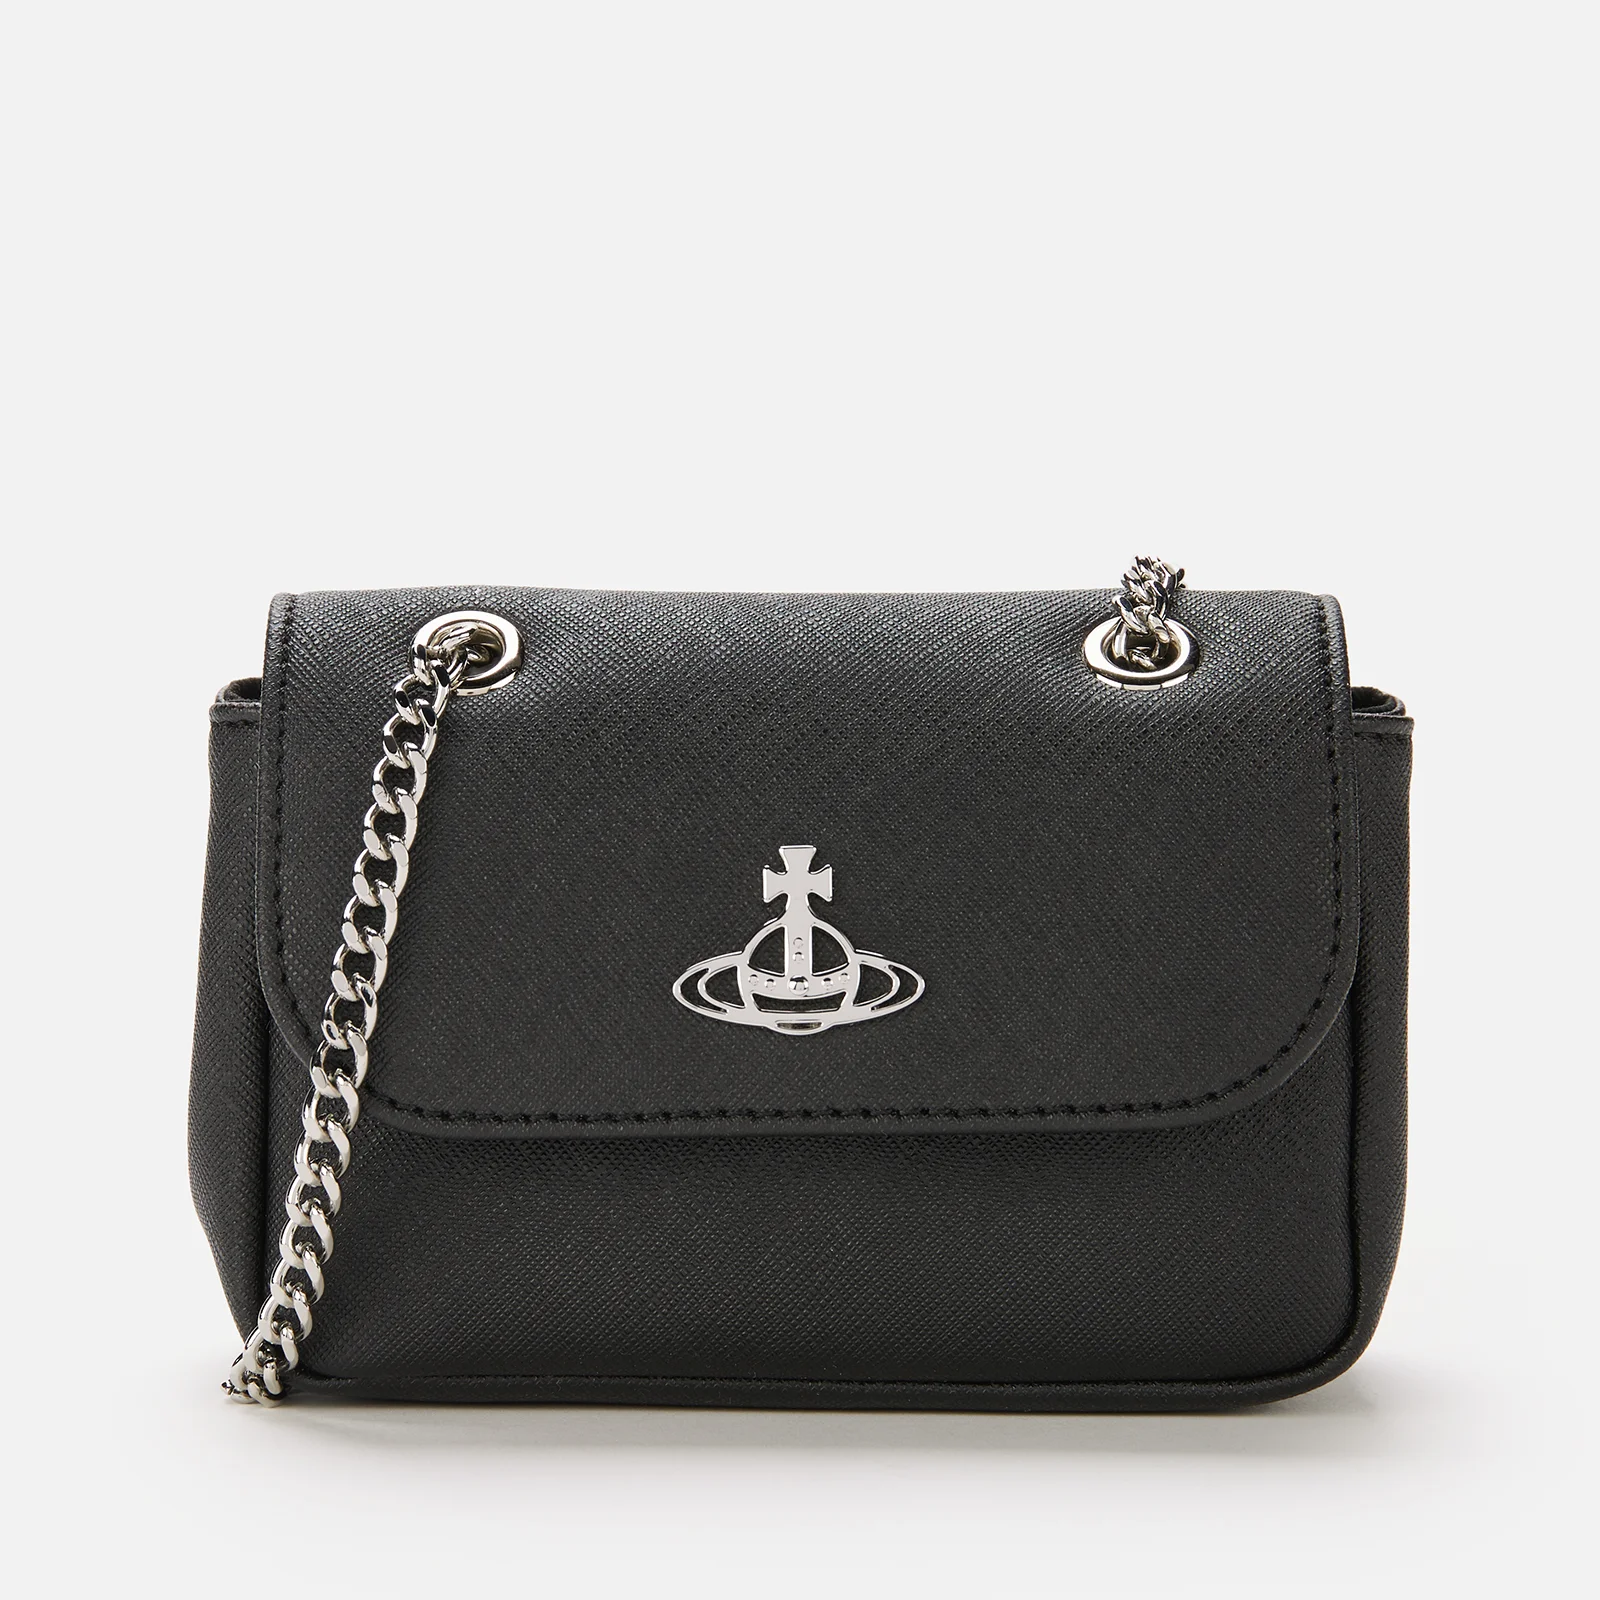 Vivienne Westwood Women's Derby Small Purse With Chain - Black Image 1